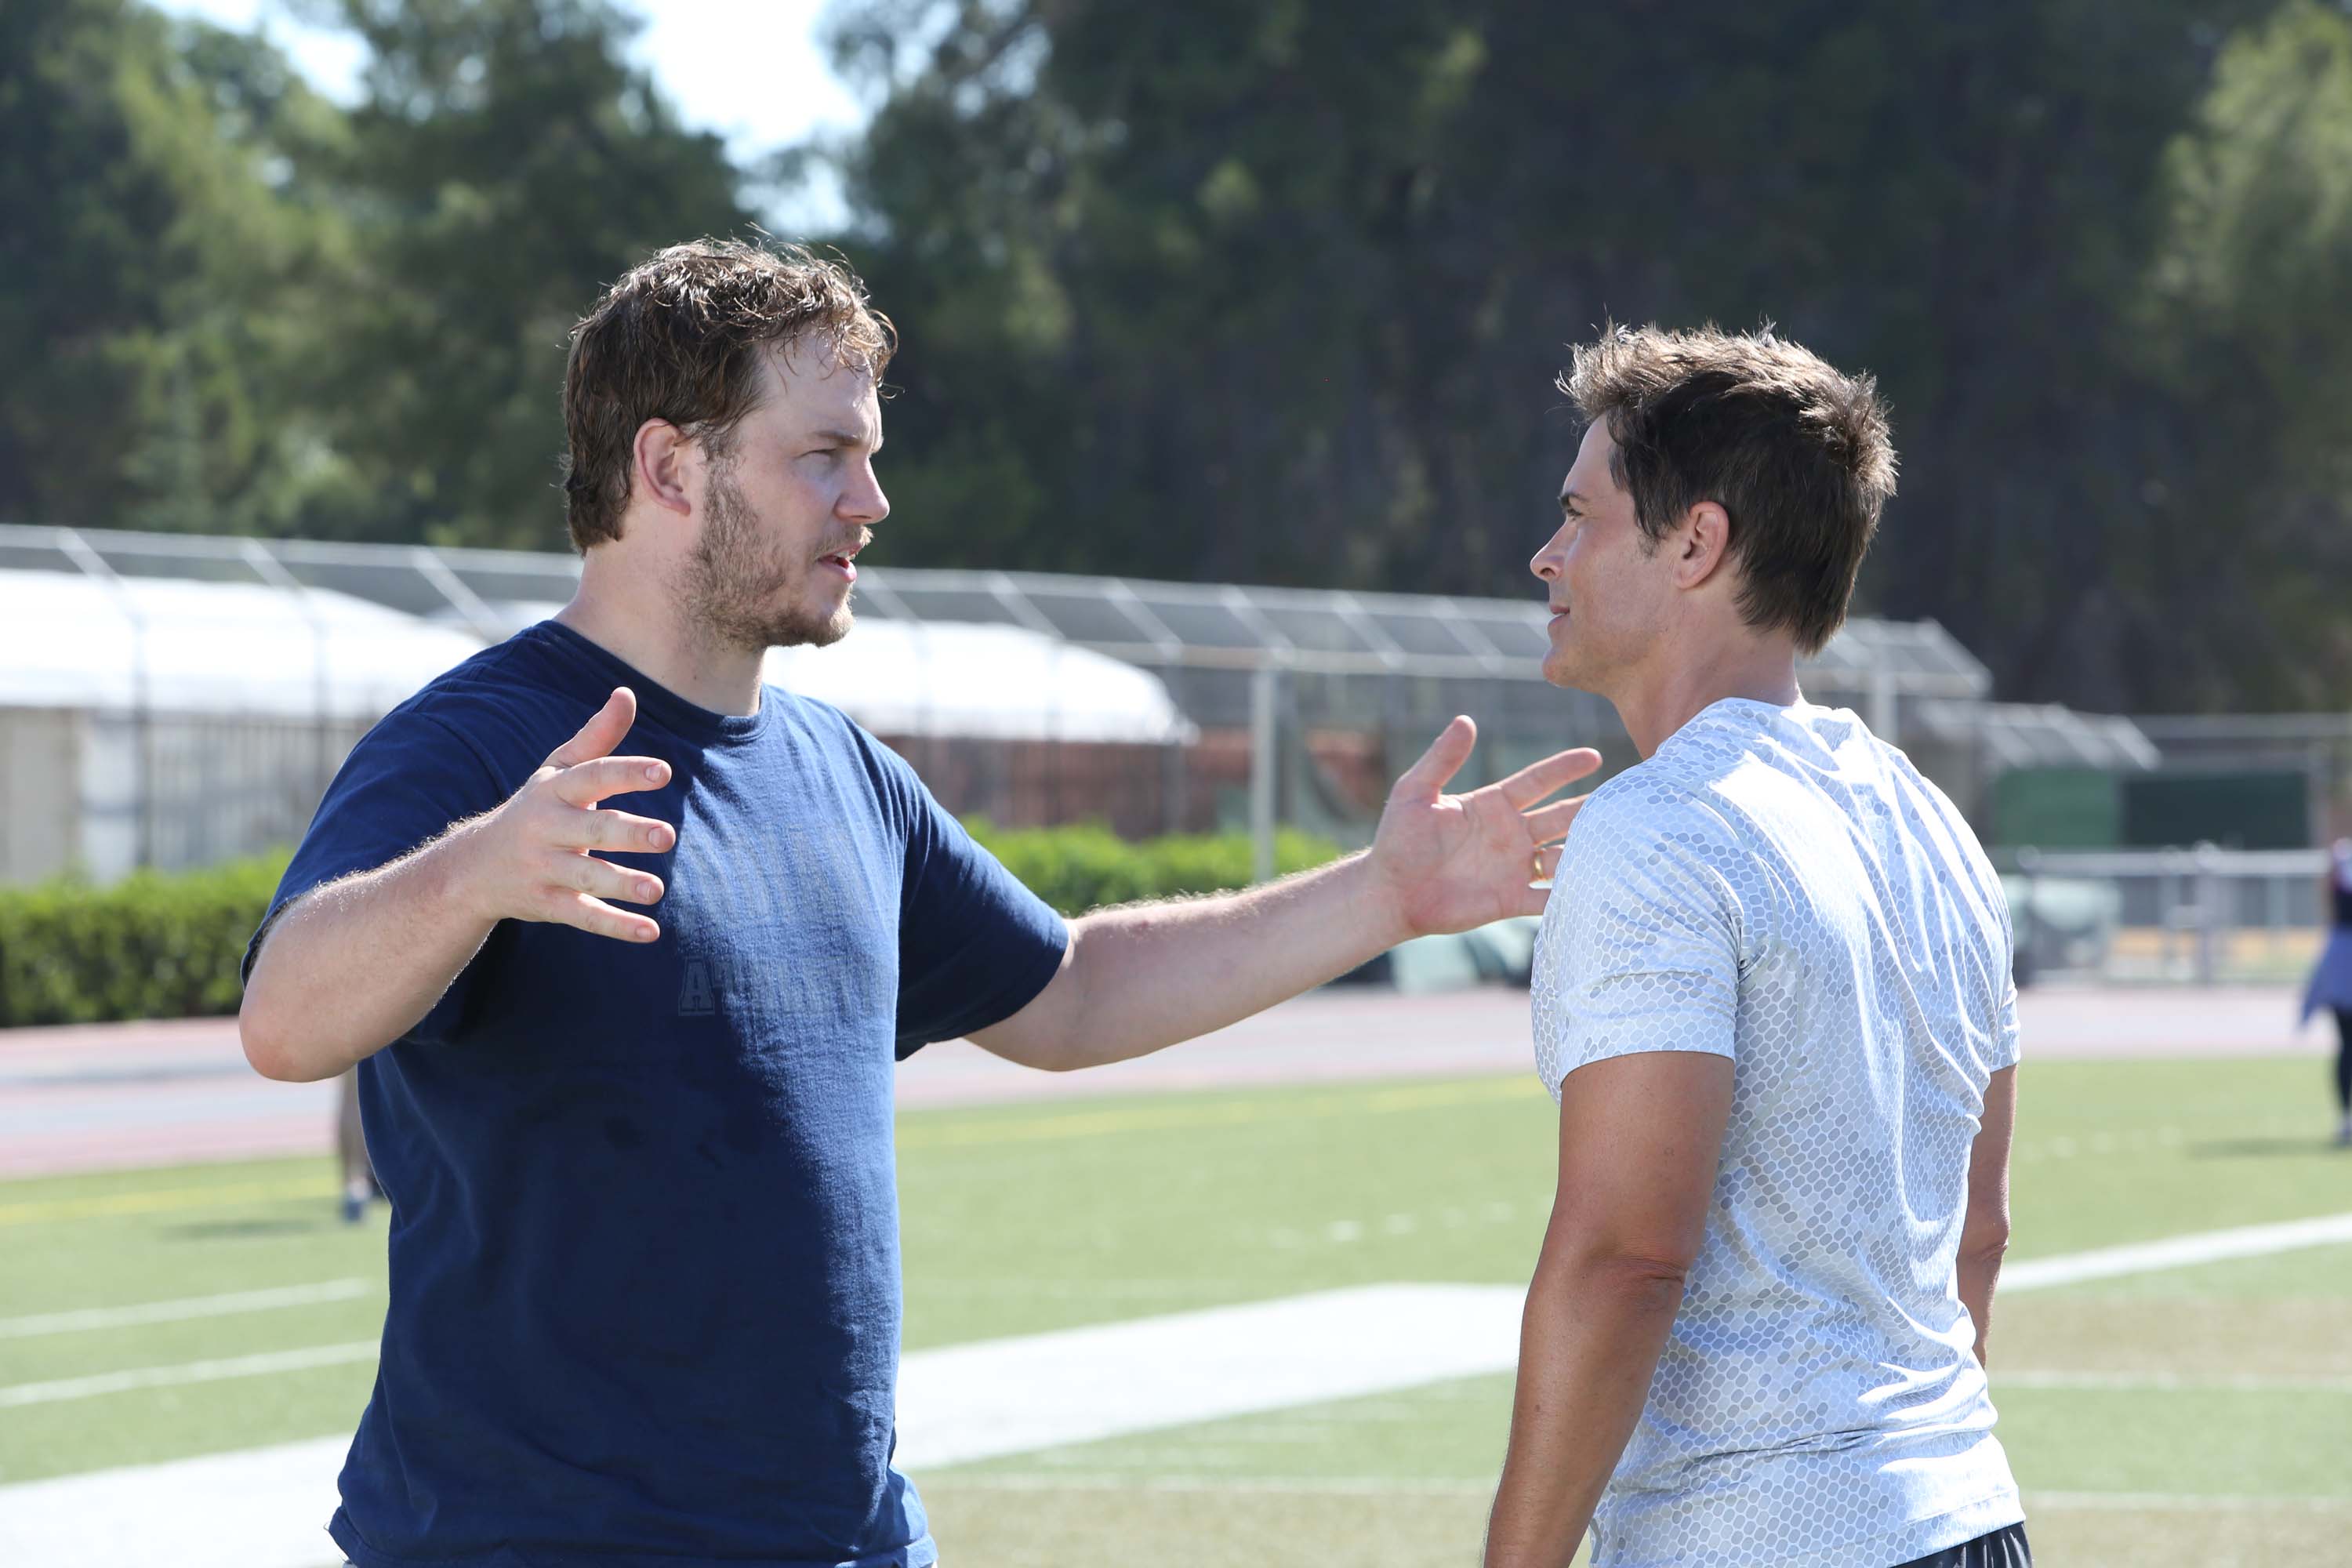 Parks and Recreation stars Chris Pratt and Rob Lowe run track together